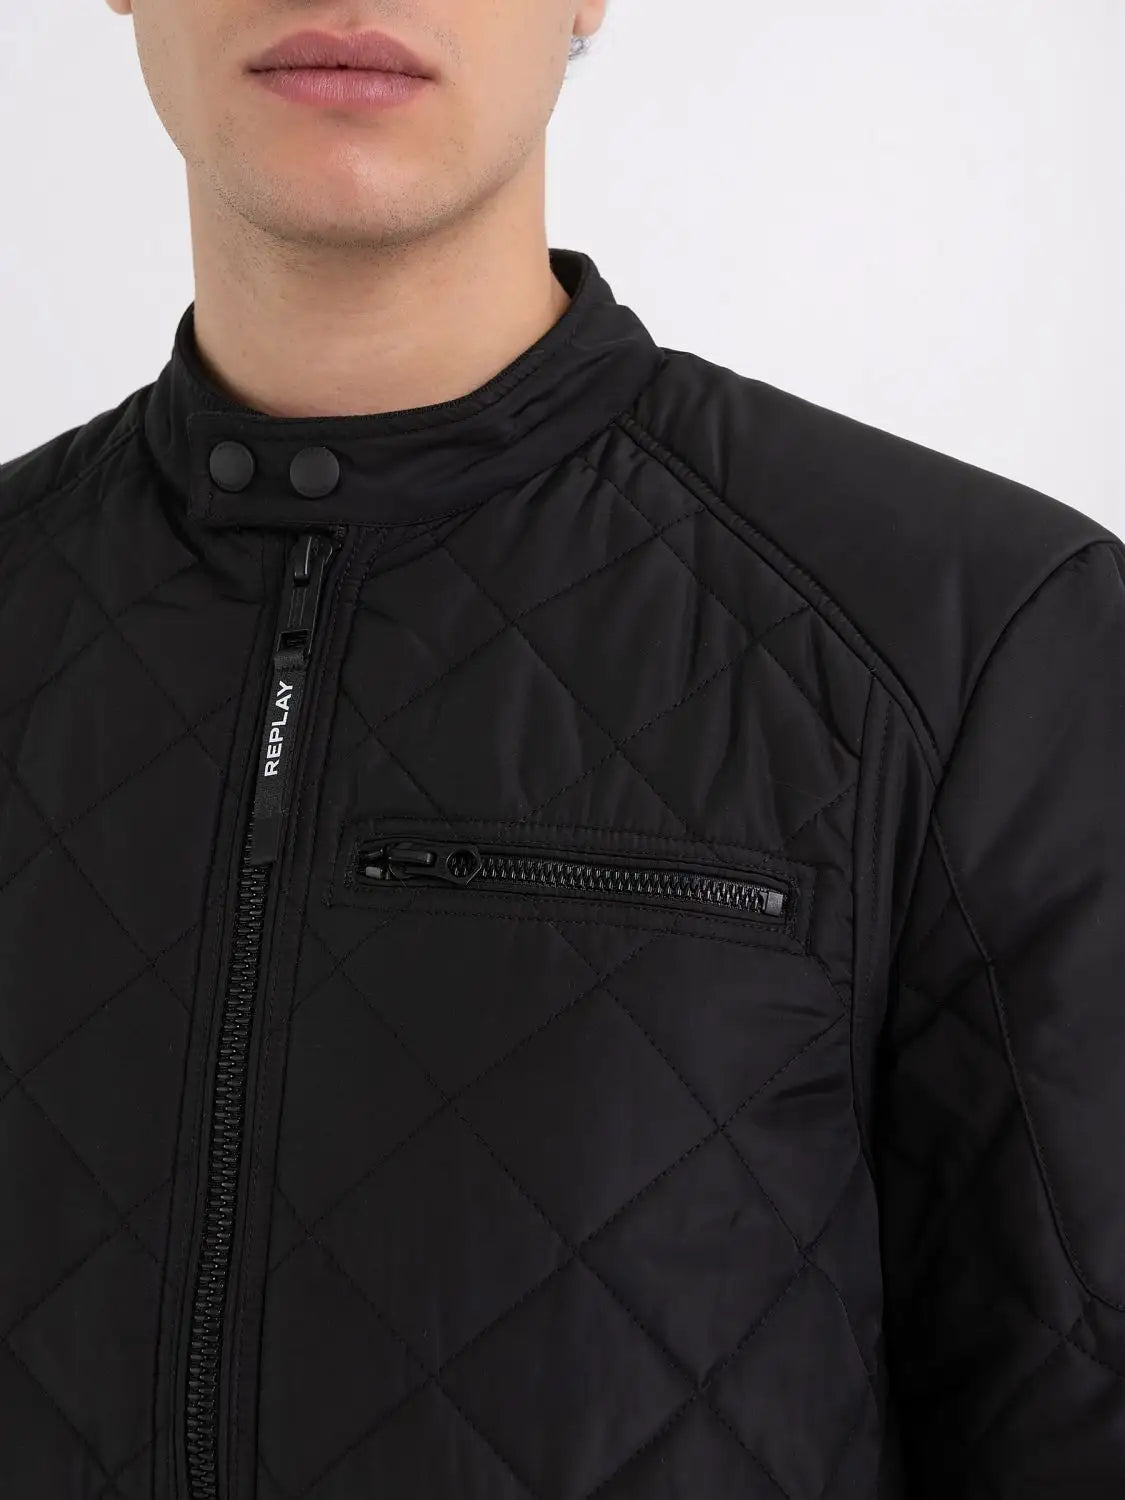 Replay Short Quilted Jacket Black - M8000.000.84442